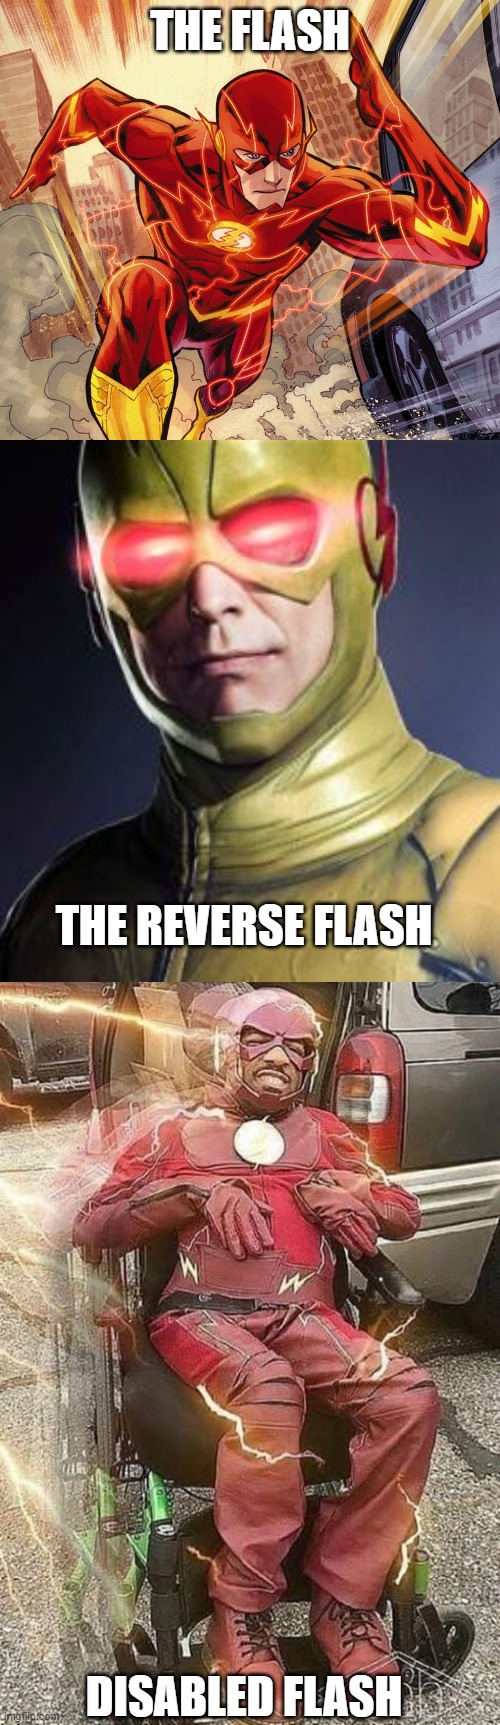 The Flashverse lol | THE FLASH; THE REVERSE FLASH; DISABLED FLASH | image tagged in the flash,reverse flash,multiverse | made w/ Imgflip meme maker